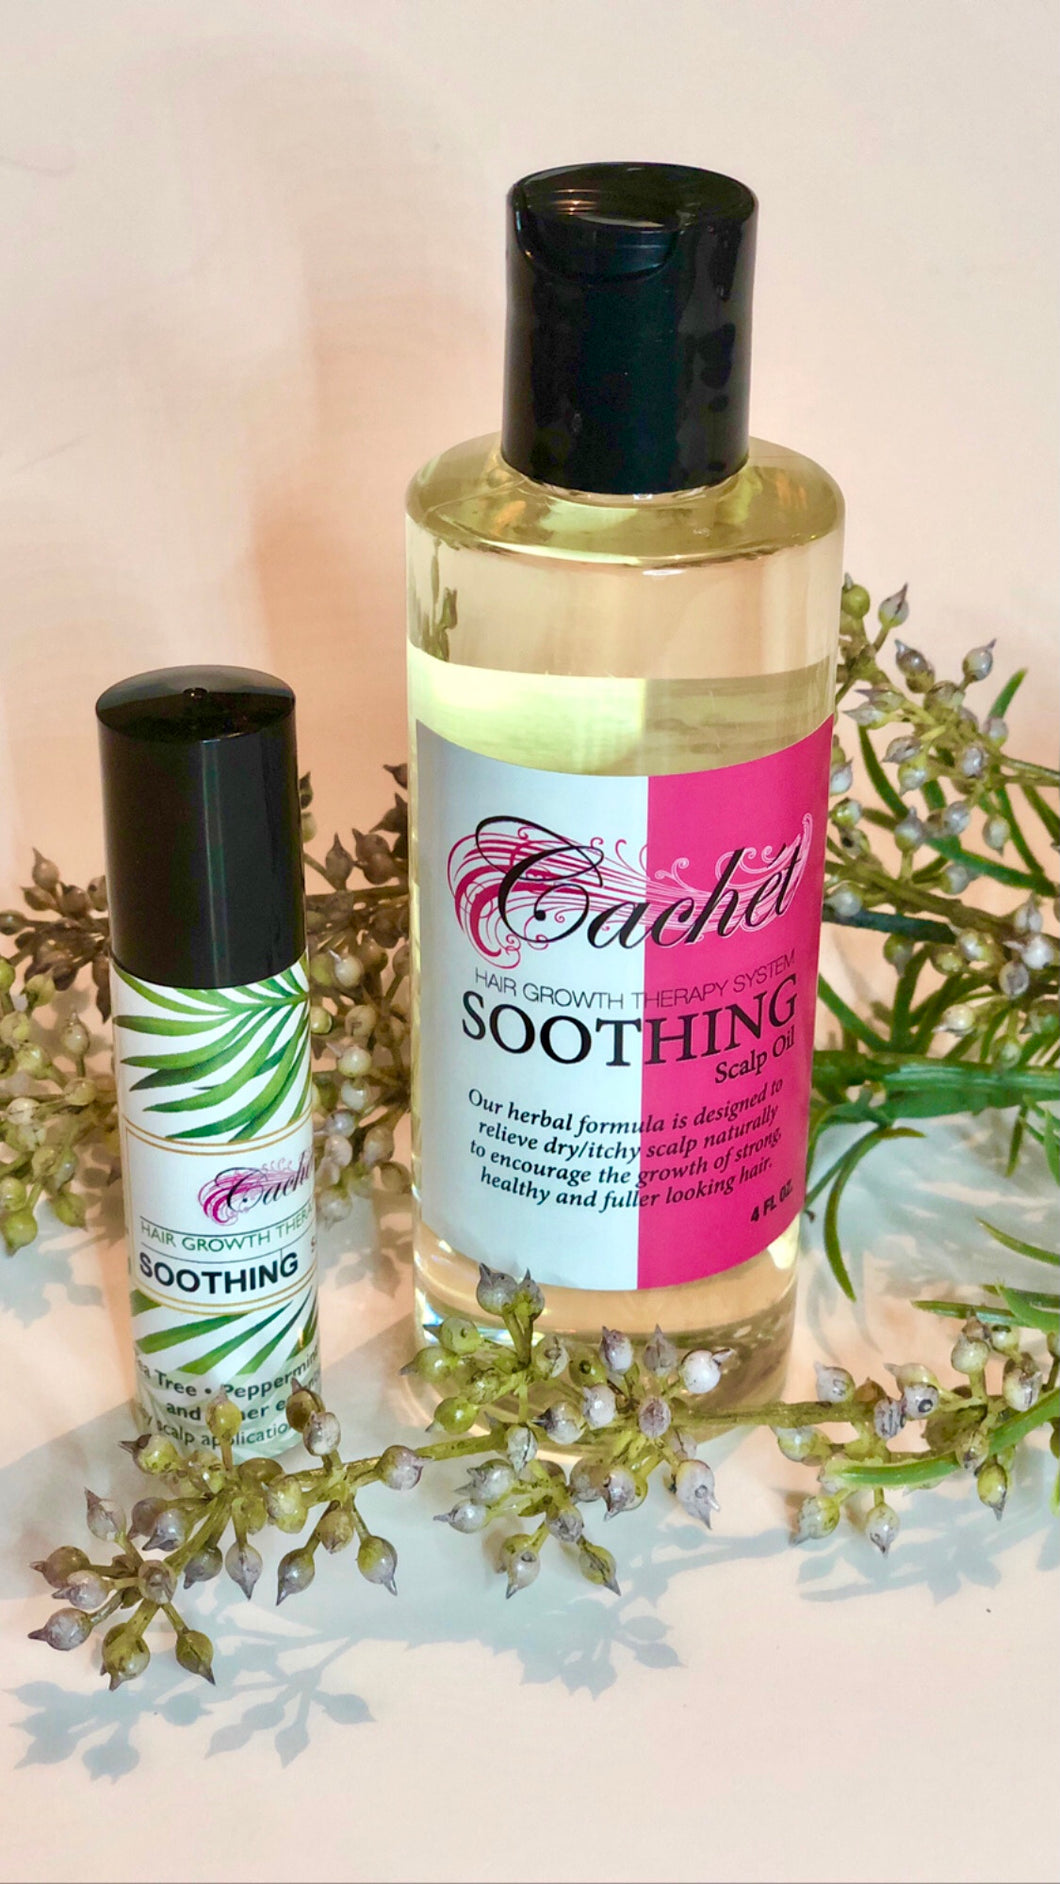 Cachét Soothing Scalp Oil and Rollerball (VALUE PACK)